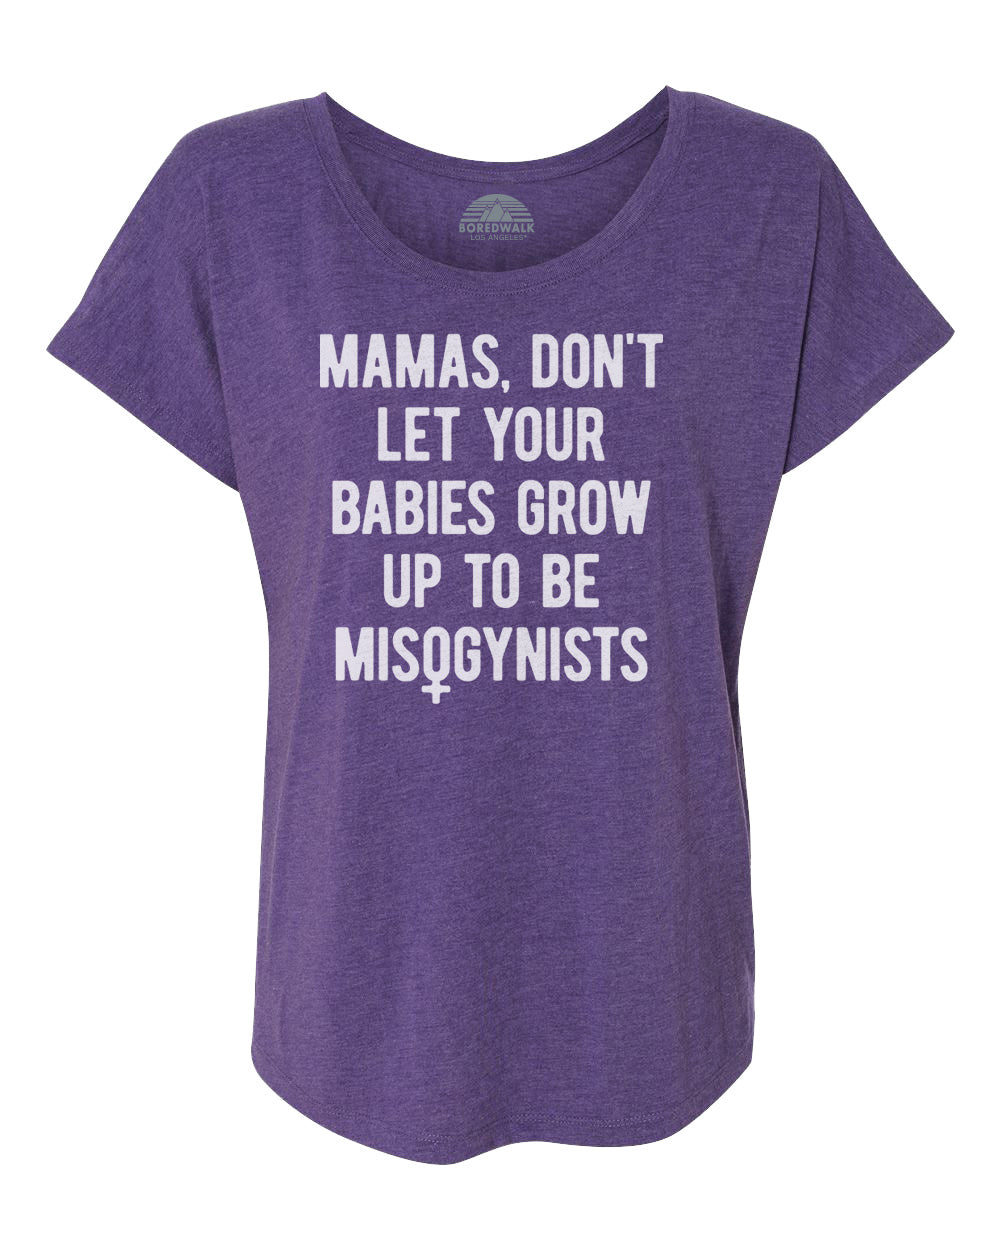 Women's Mamas Don't Let Your Babies Grow Up to be Misogynists Scoop Neck T-Shirt